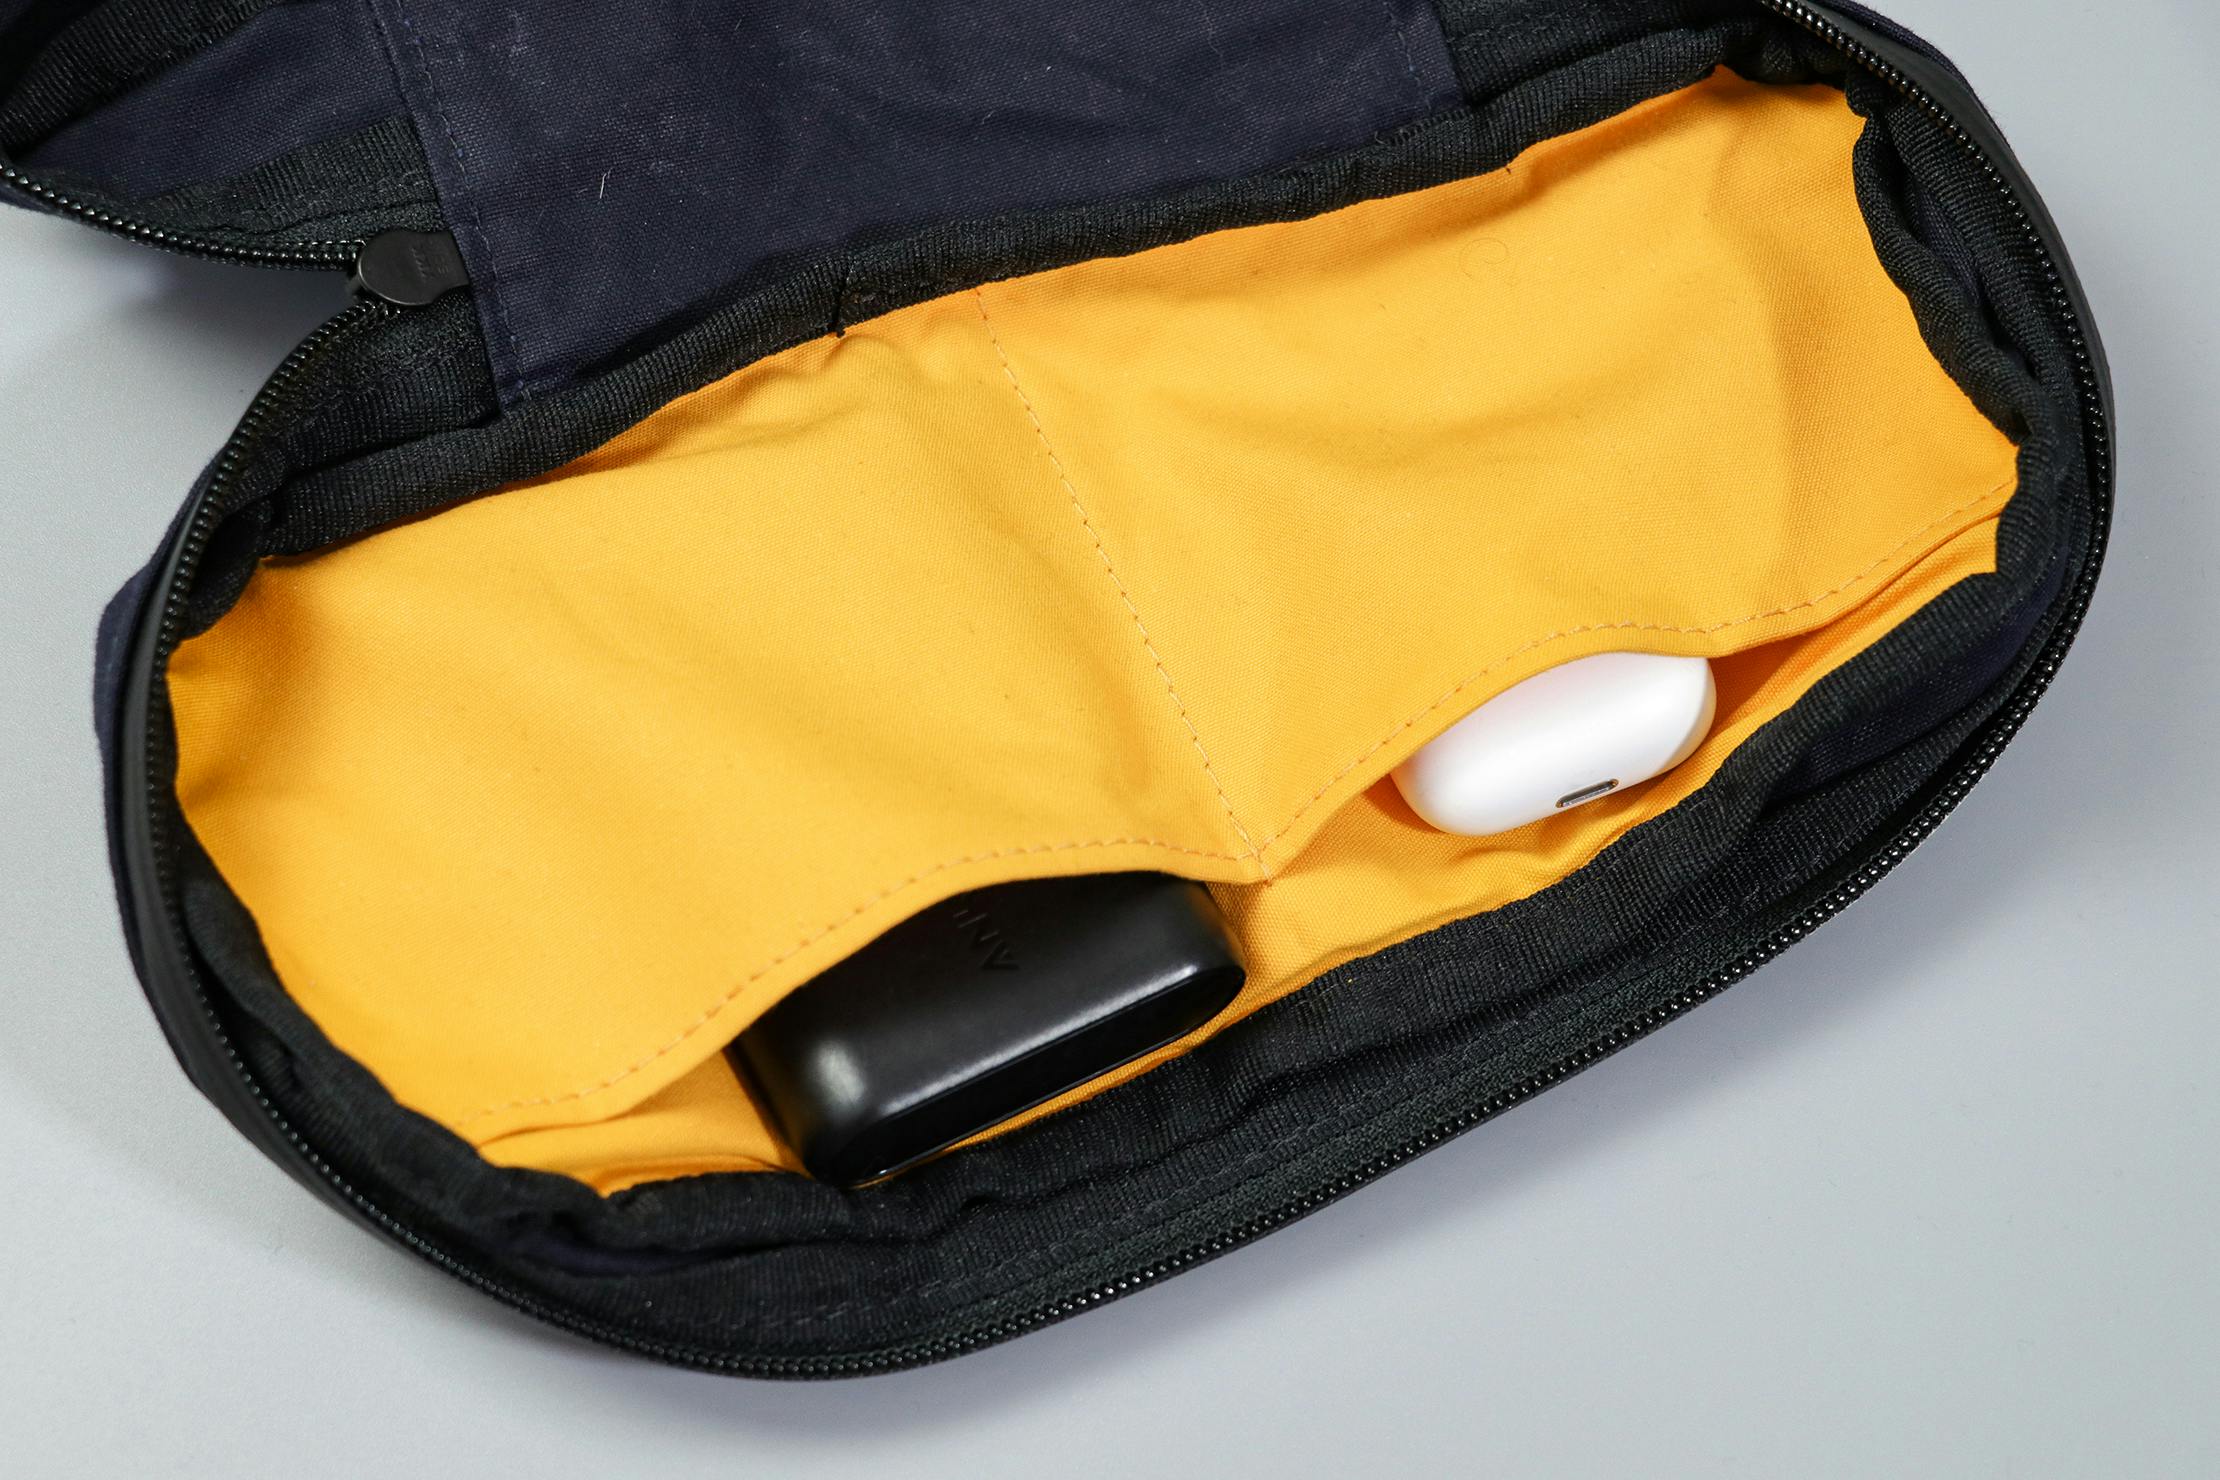 Trakke Laggan Travel Accessory Pouch Review (2019) | Pack Hacker